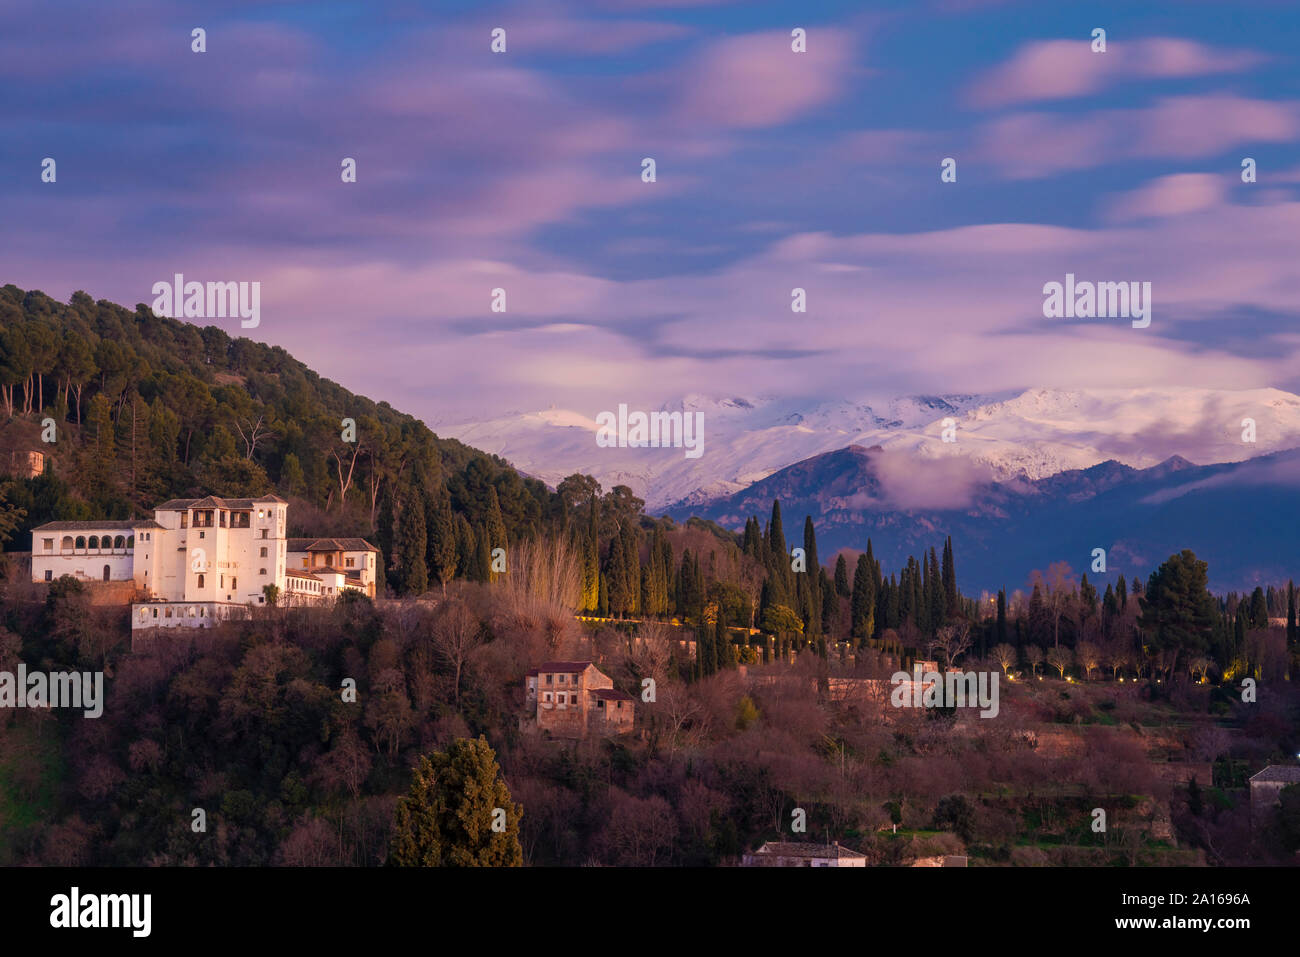 View of Alhambra with Sierra Nevada in the background at sunset, Granada, Spain Stock Photo